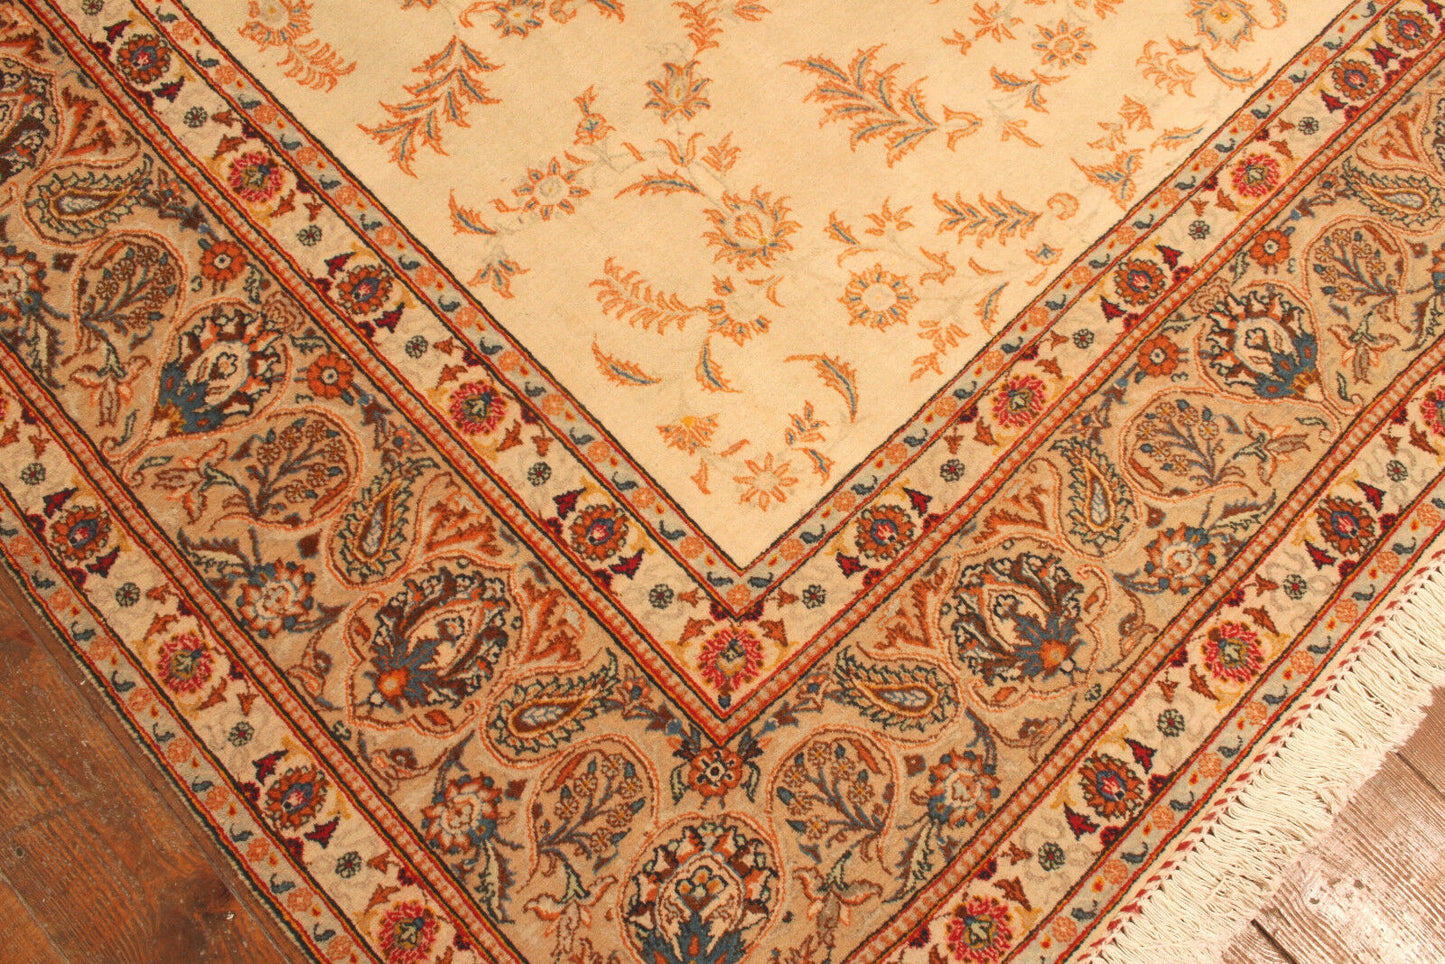 Side view of the Handmade Contemporary Persian Style Tabriz Rug demonstrating texture